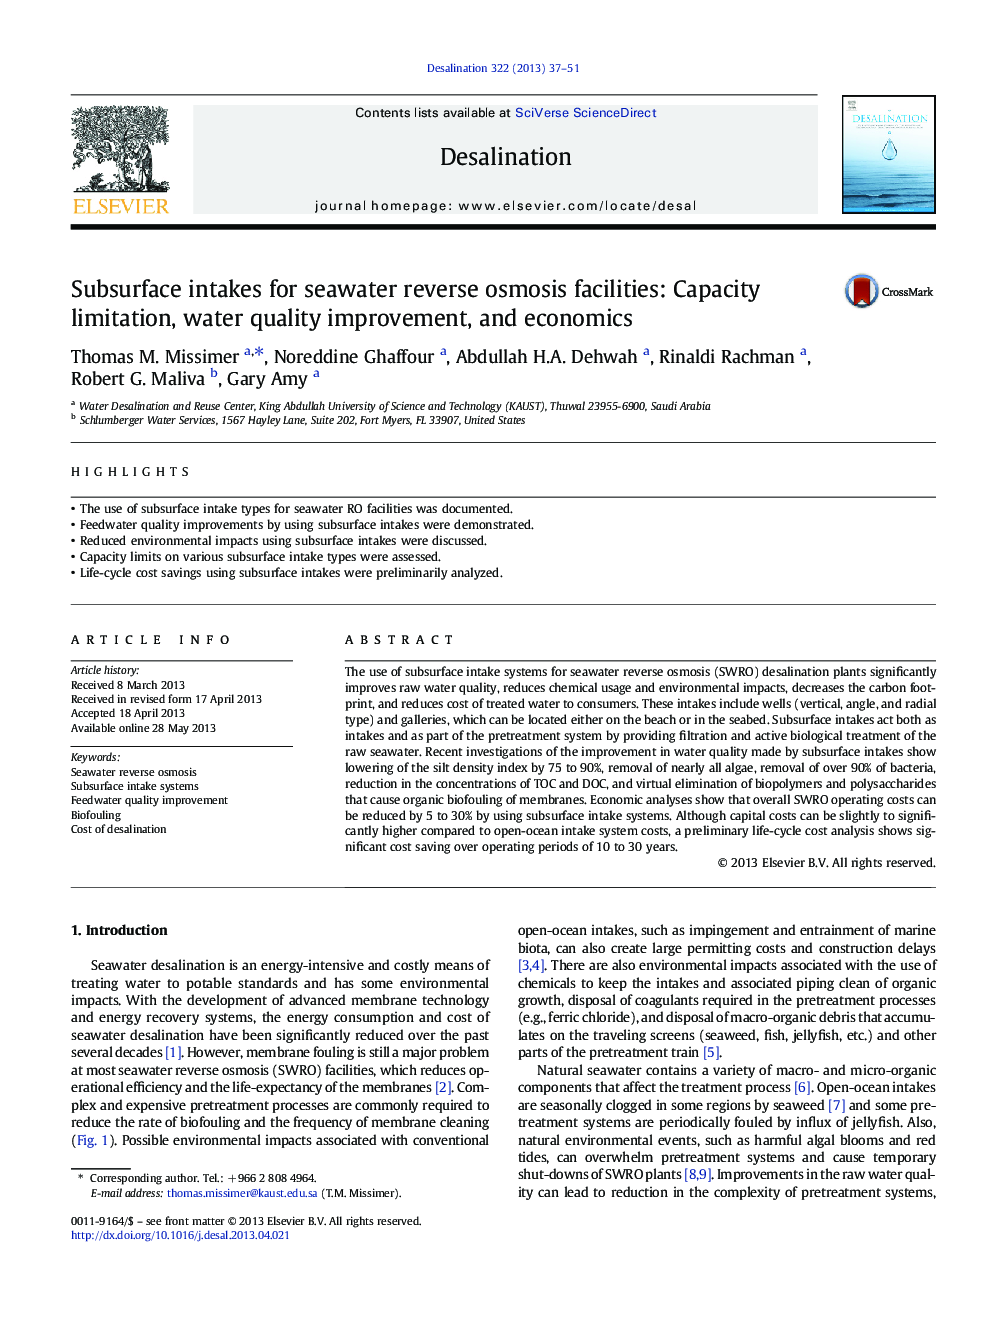 Subsurface intakes for seawater reverse osmosis facilities: Capacity limitation, water quality improvement, and economics